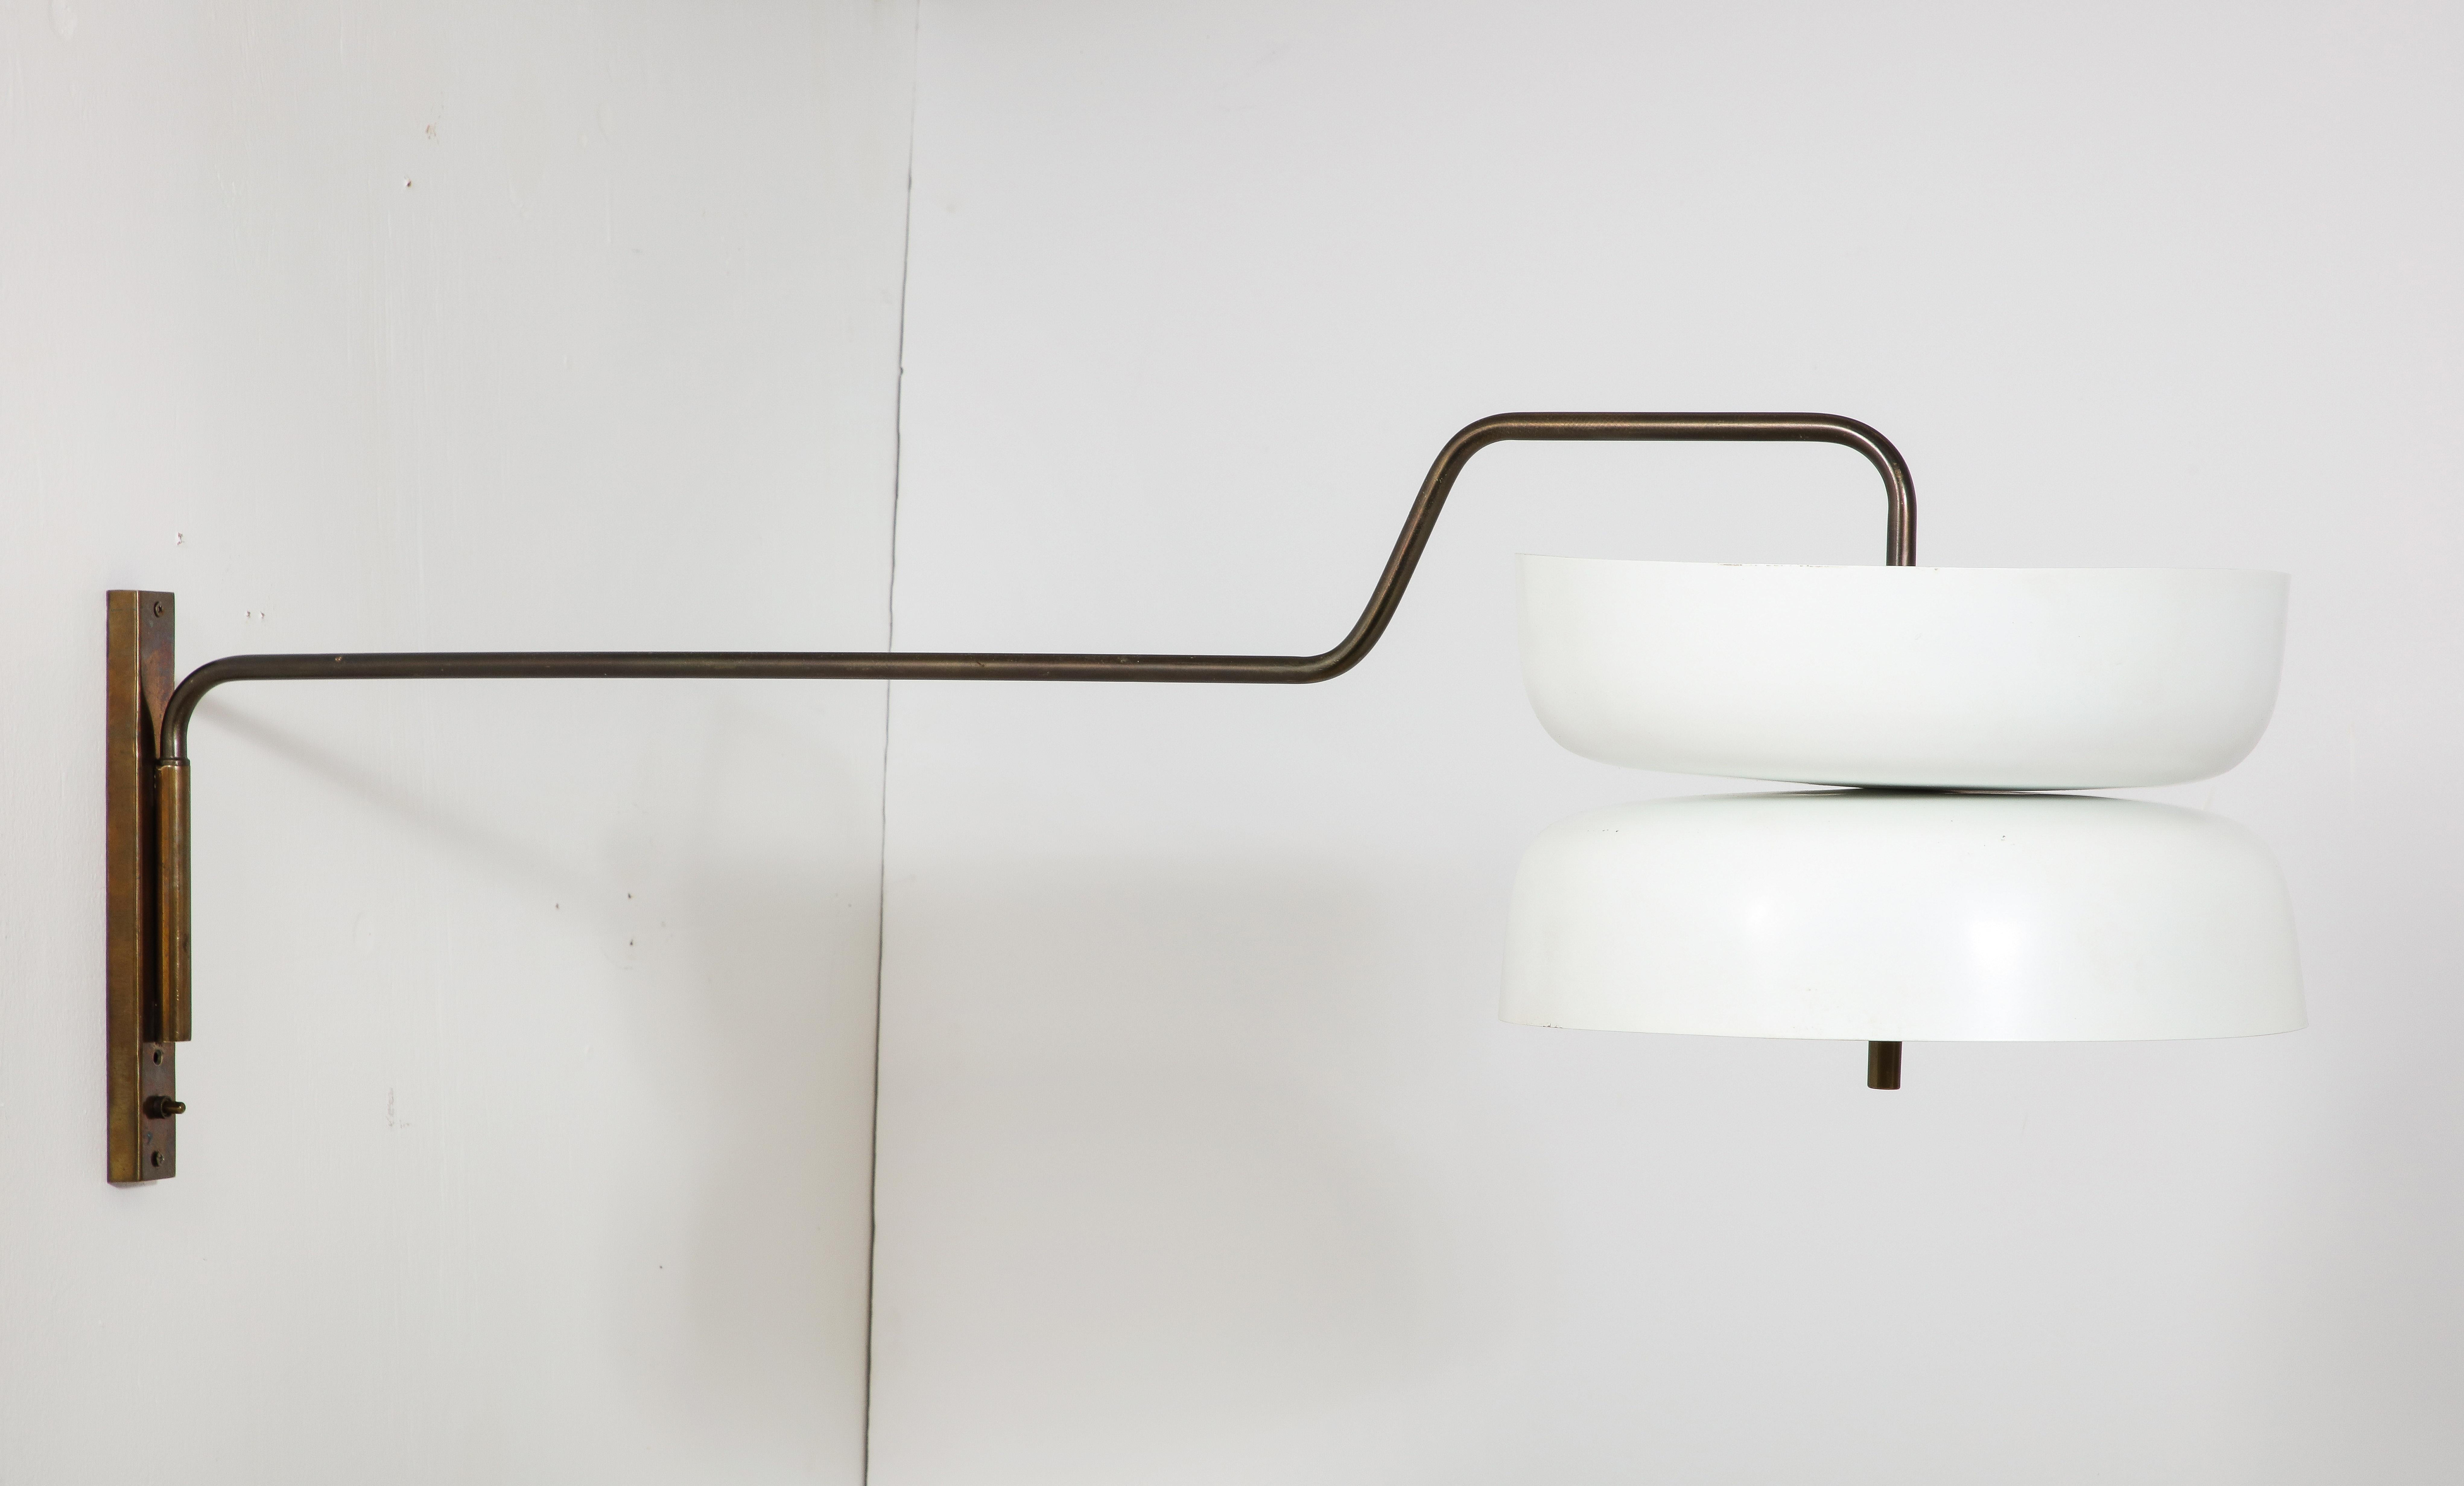 Two-tone patina steel and brass swing arm sconce with a dual reversed shade, light up and down.

48x15x16